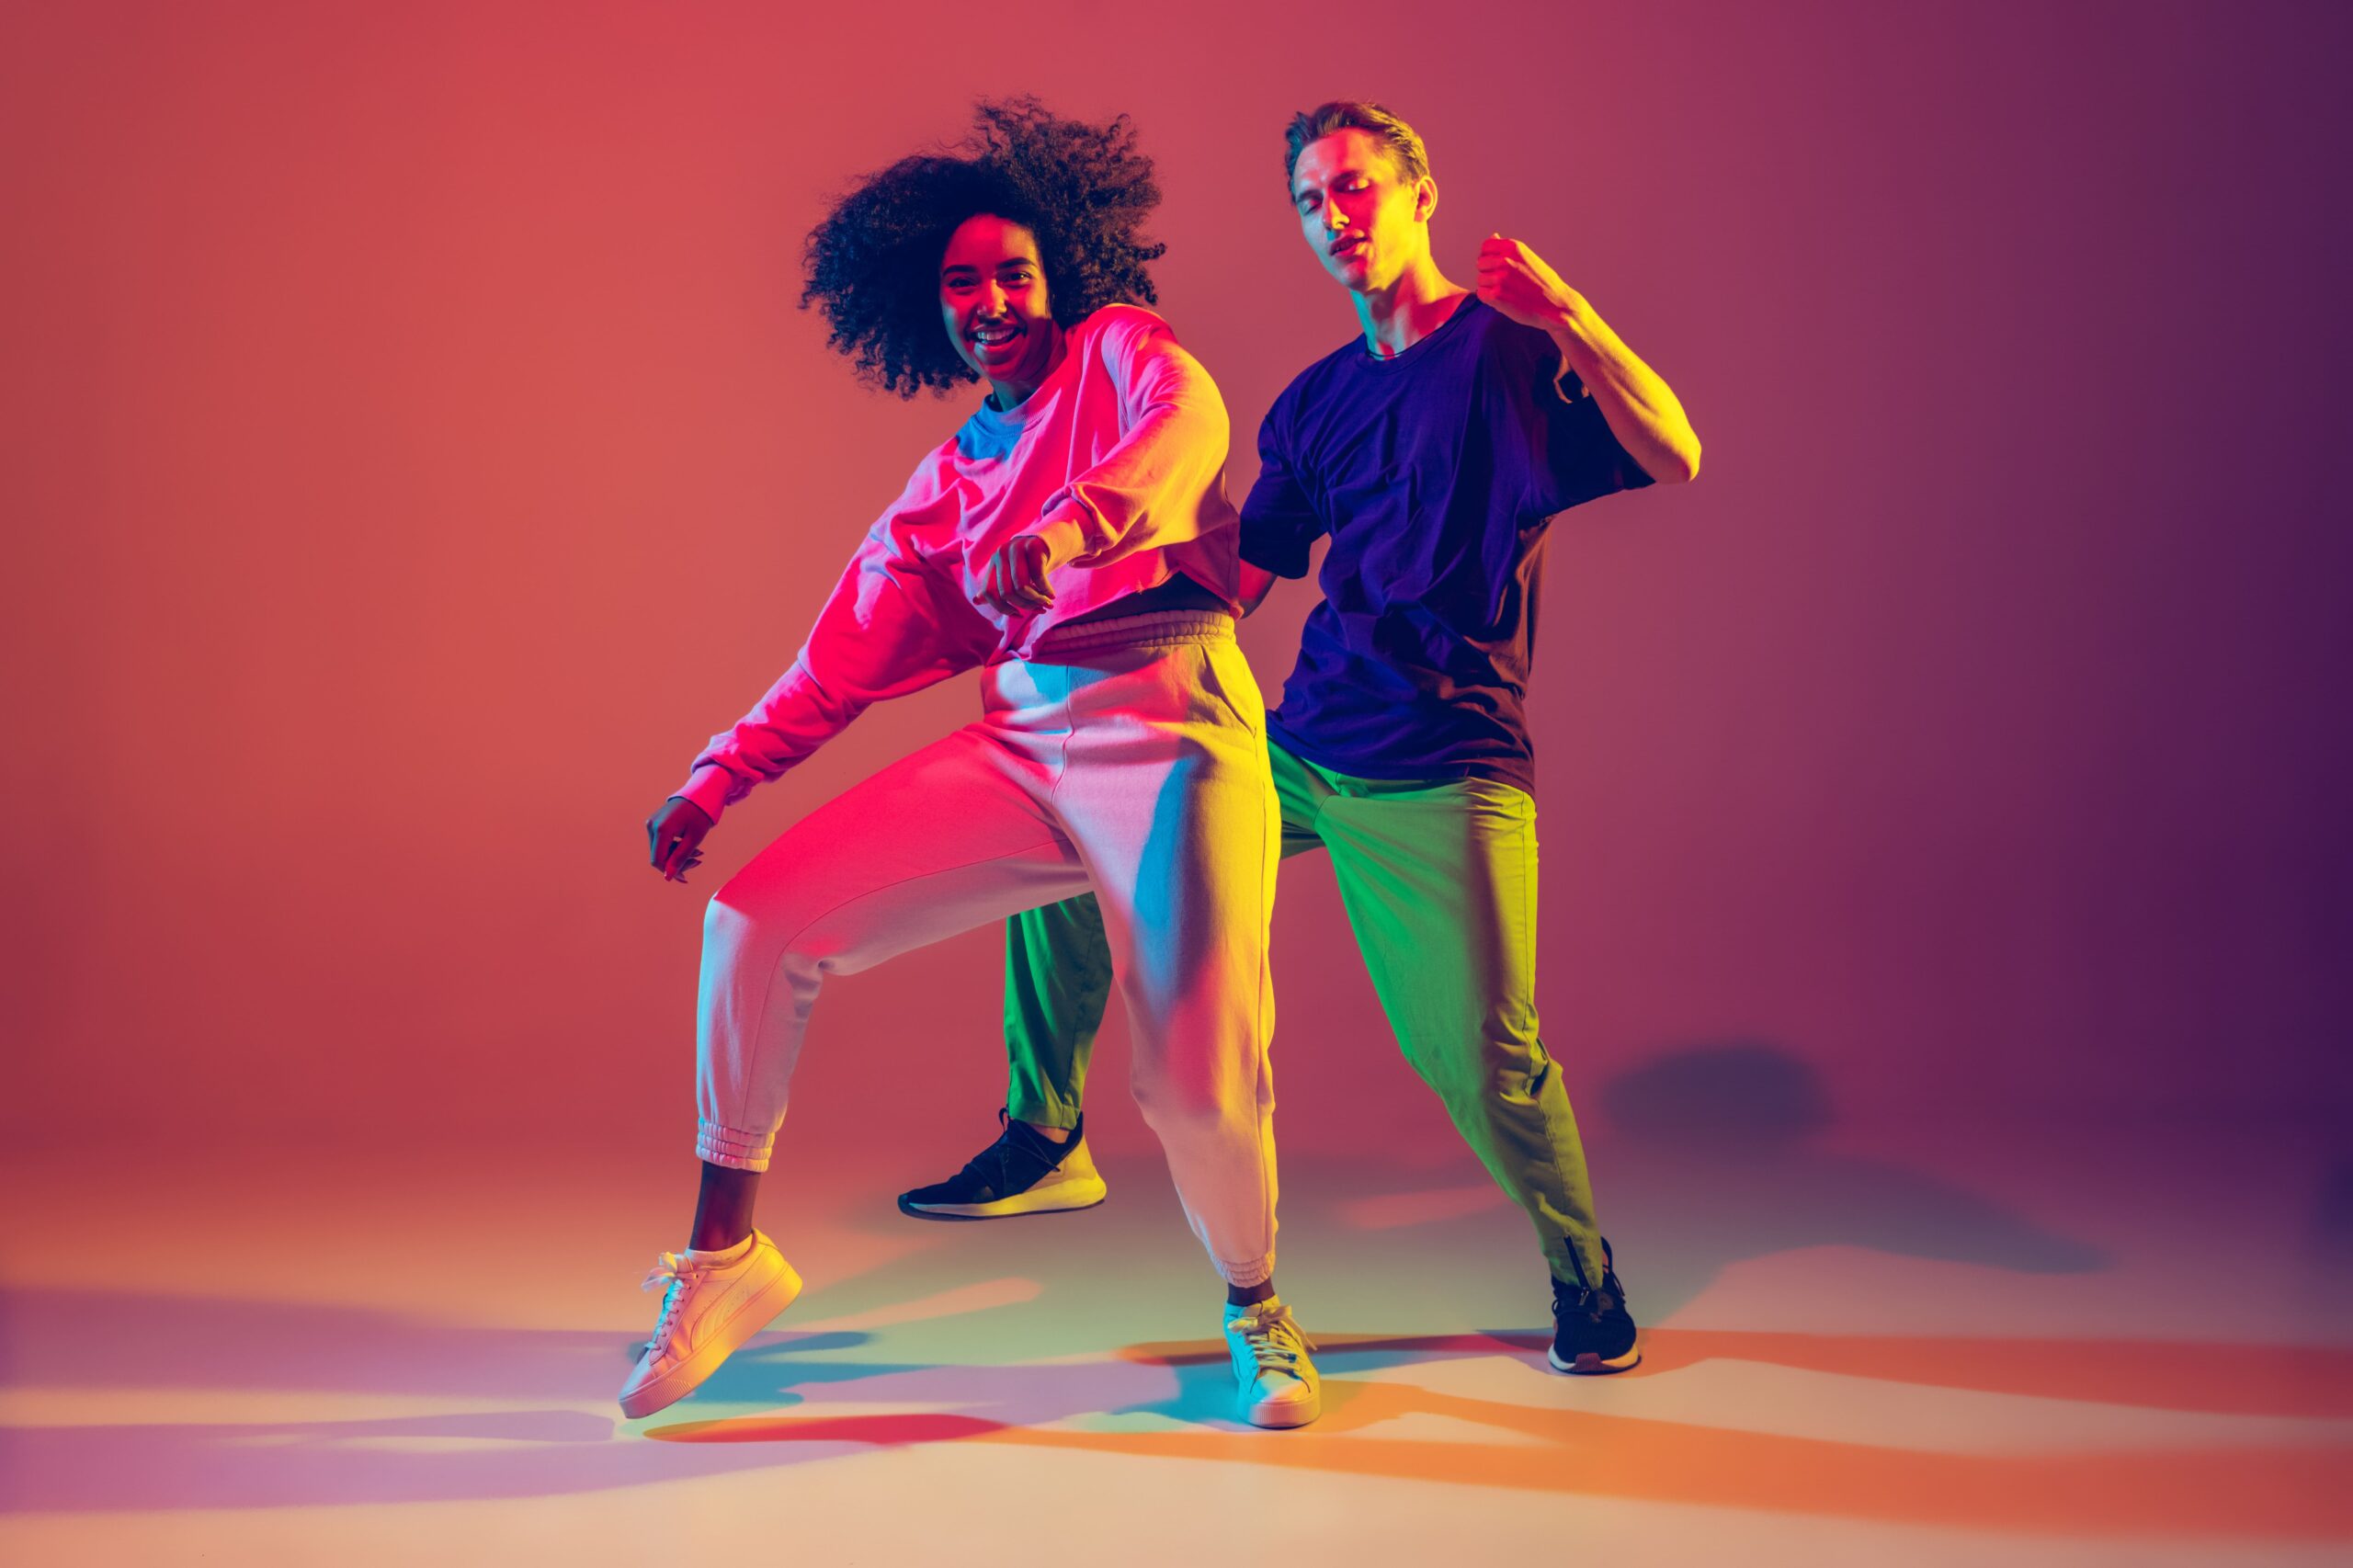 dance-time-stylish-men-and-woman-dancing-hip-hop-in-bright-clothes-on-green-background-at-dance-hall-in-neon-light-min (1)